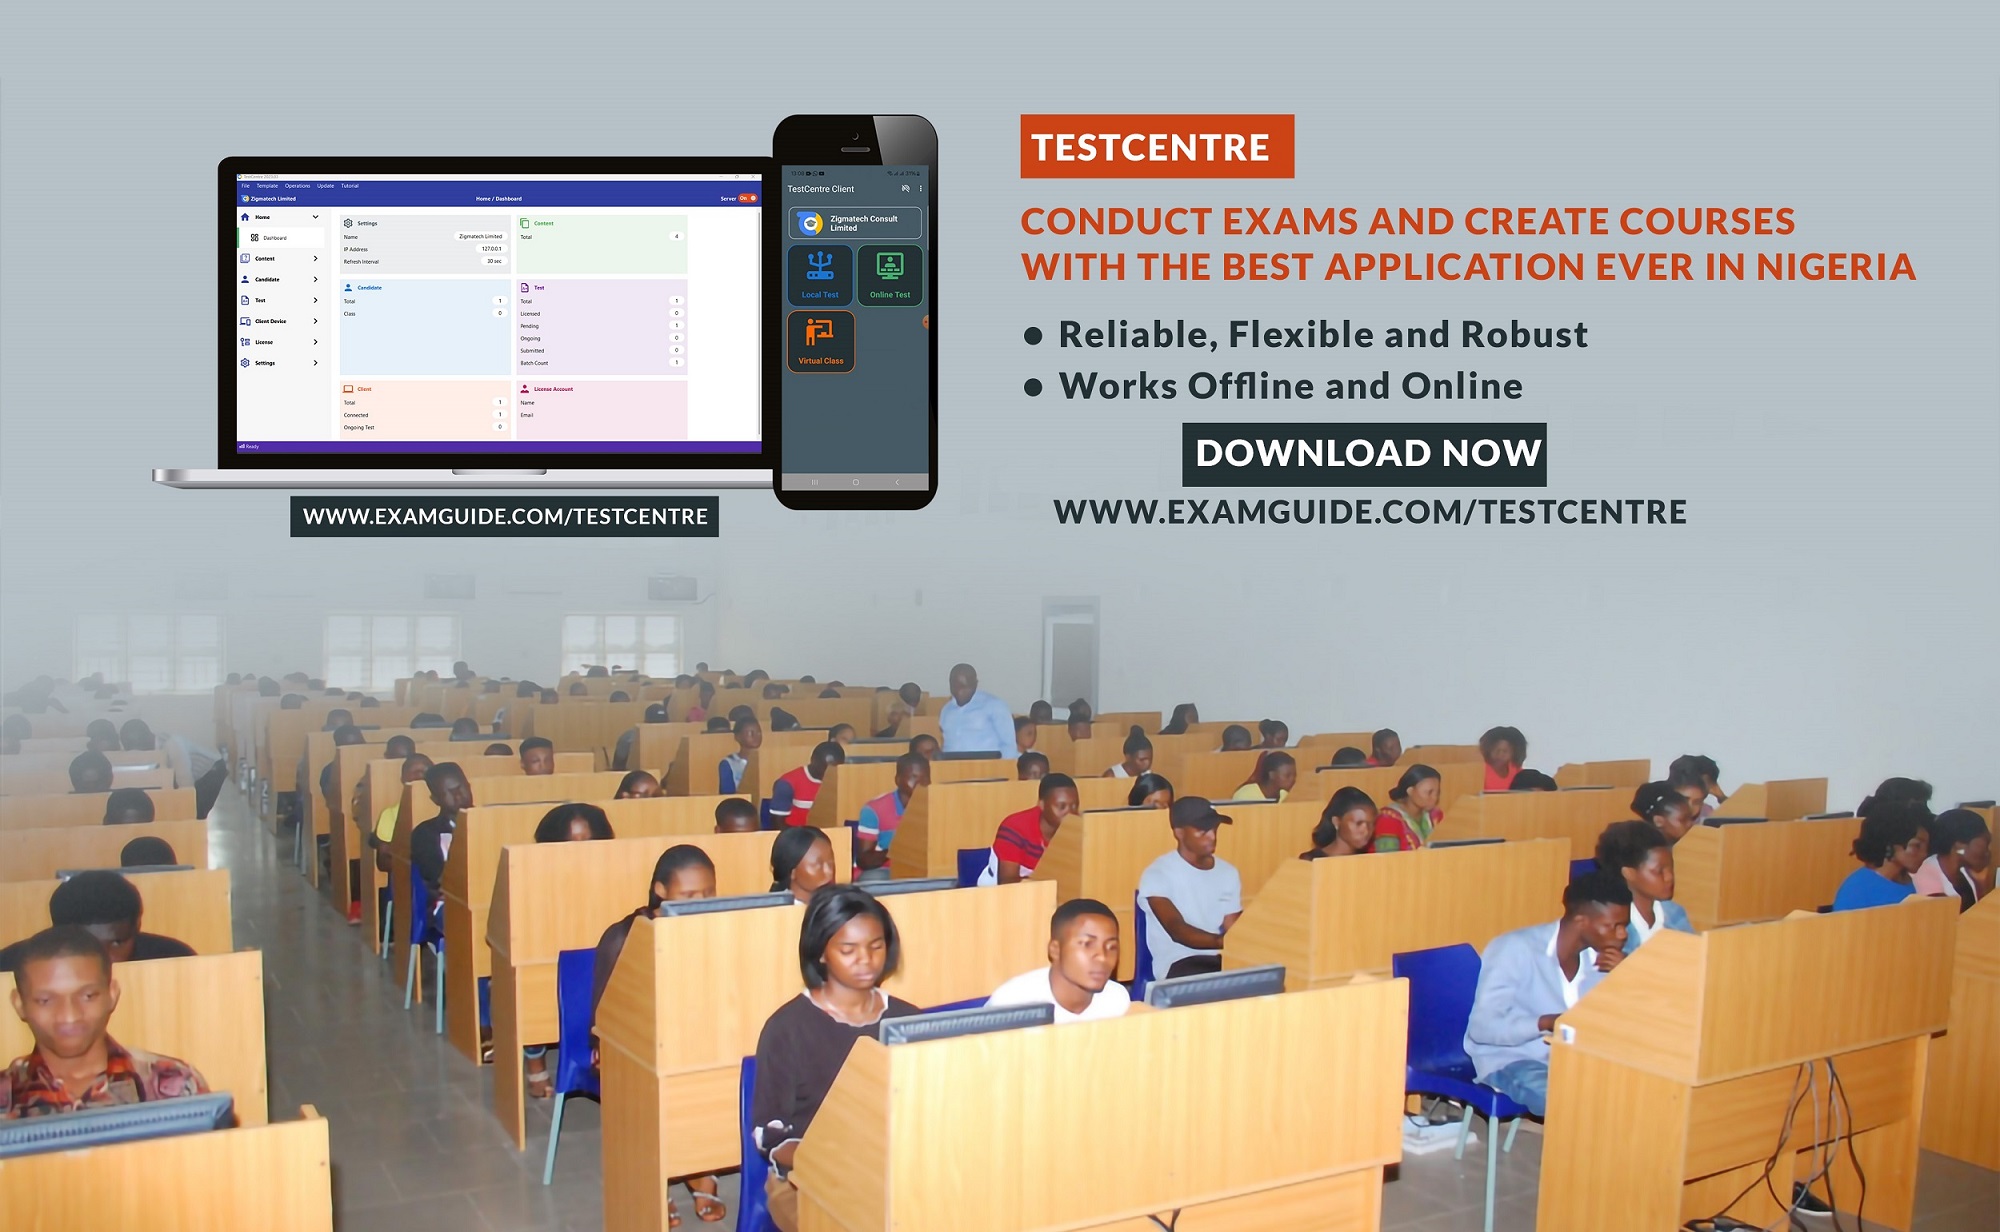 TESTCENTRE: A ROBUST PLATFORM FOR EXAM ADMINISTRATION AND CONTENT MANAGEMENT